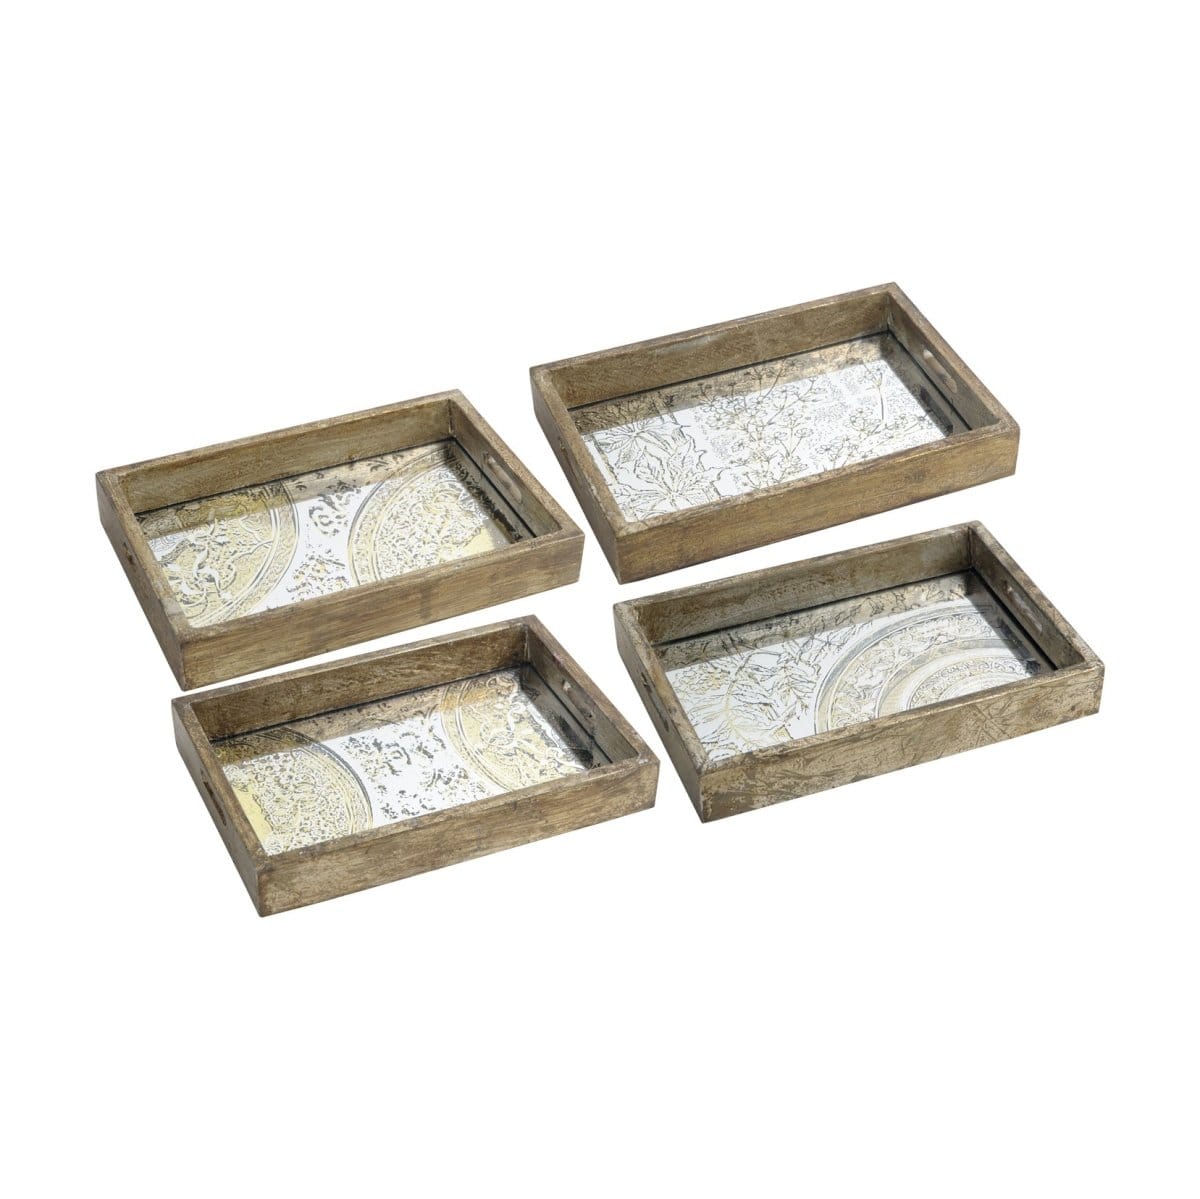 AB-31498 S/4 12x8" Trays picket and rail